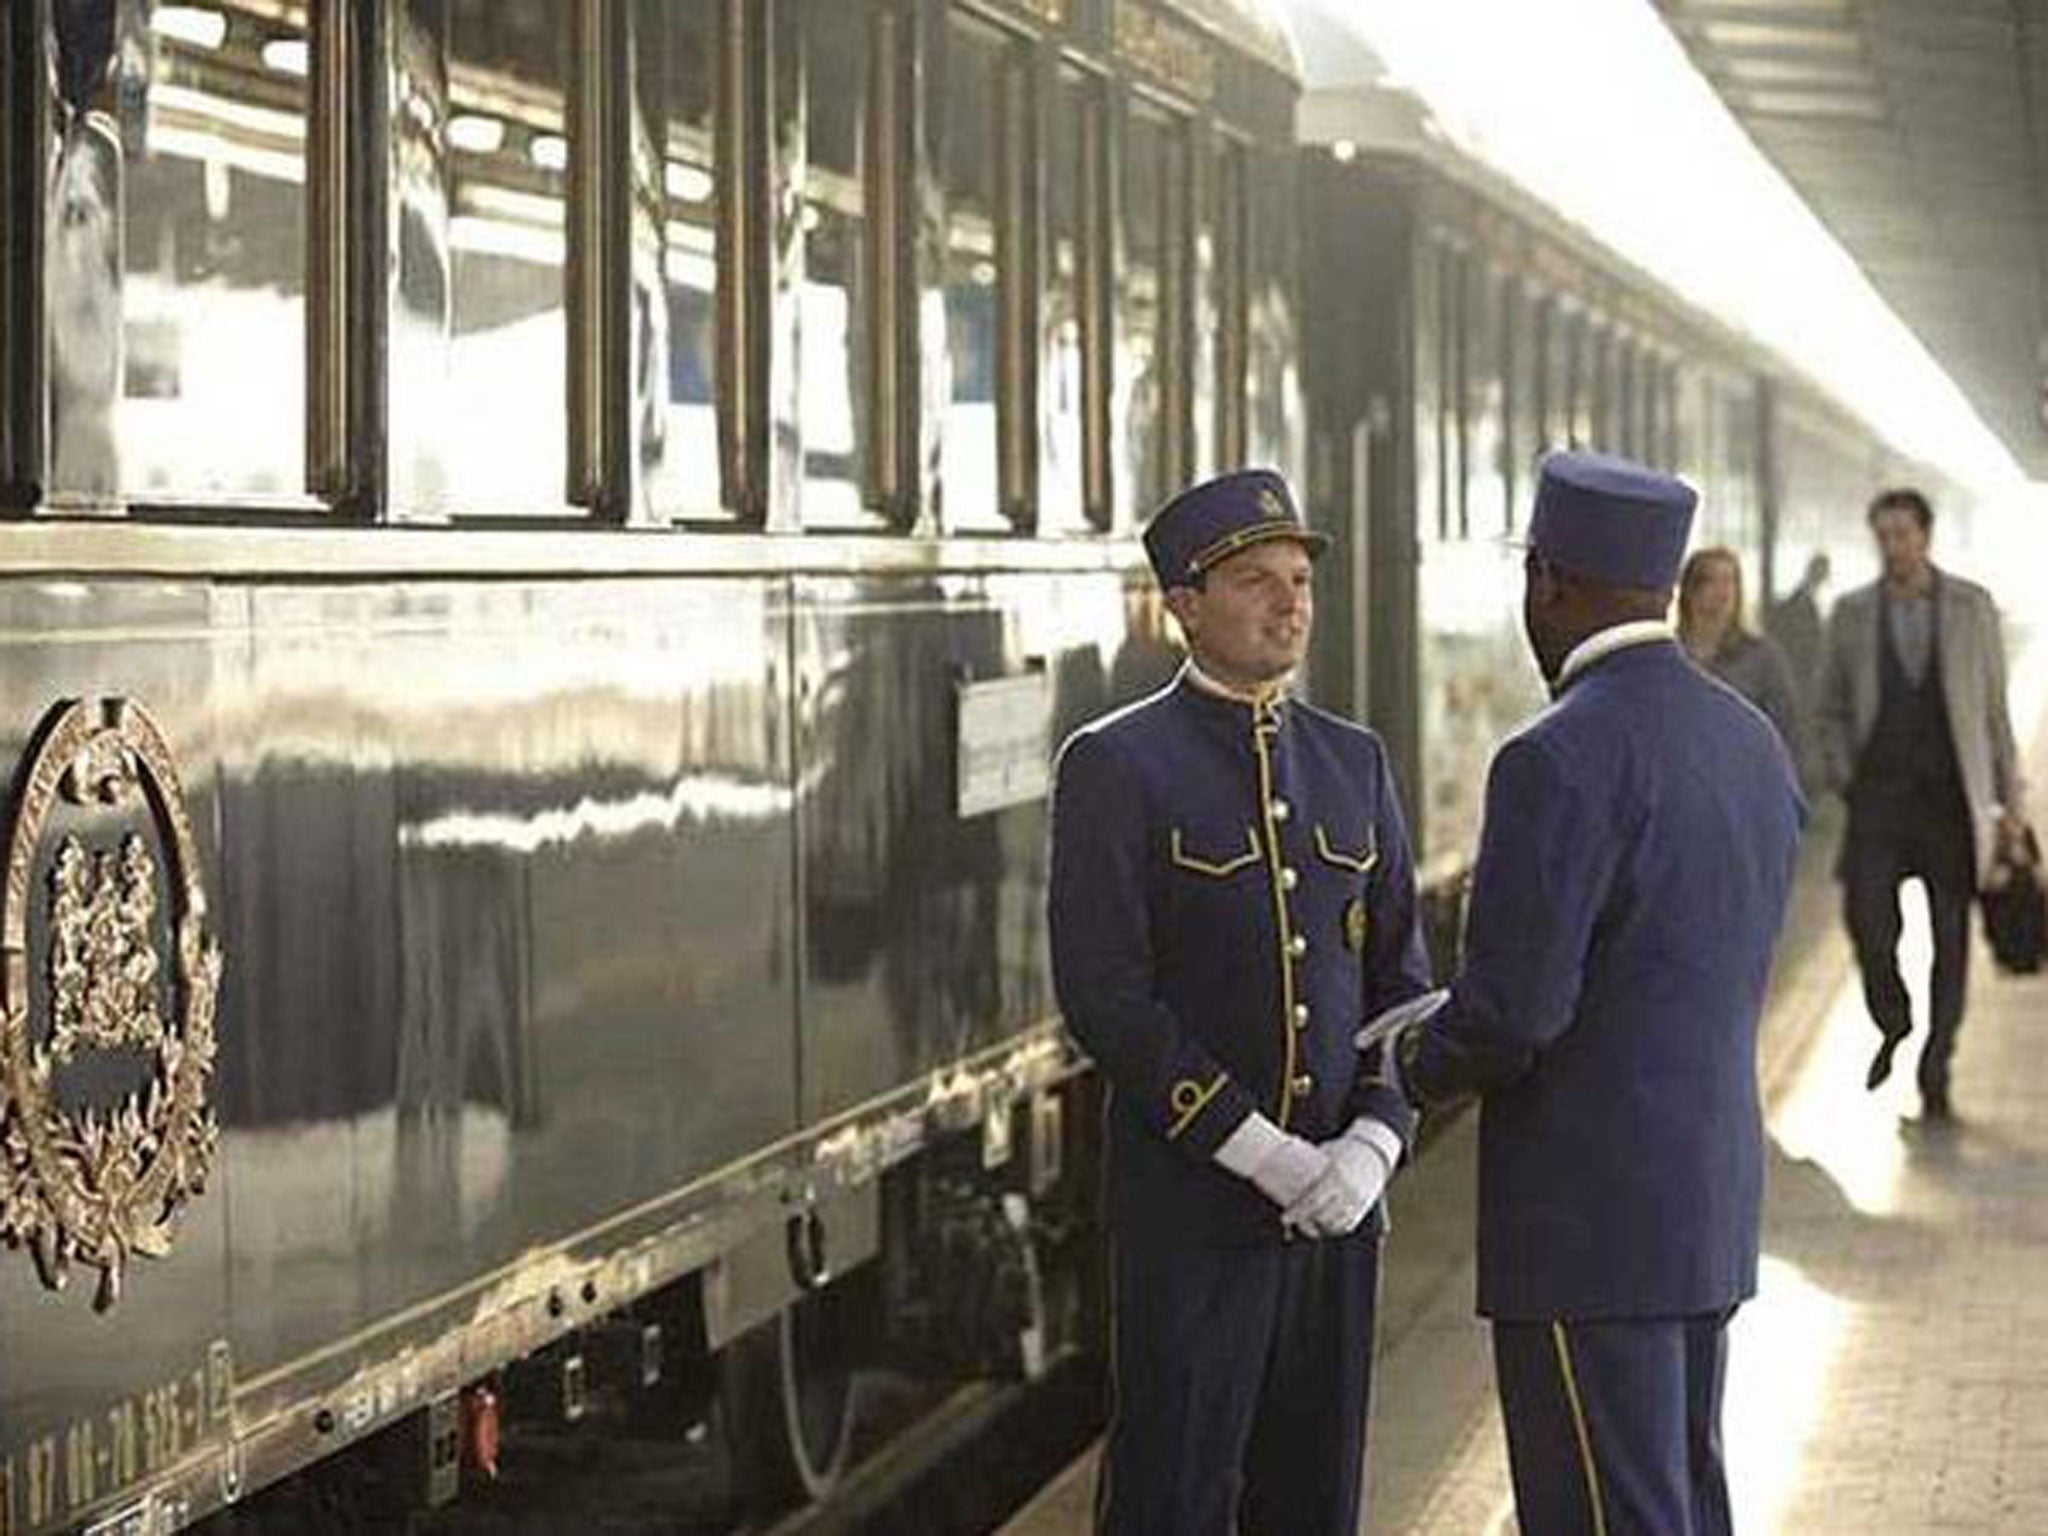 Make tracks: The Venice-Simplon Orient Express will be part of a newly branded luxury travel portfolio